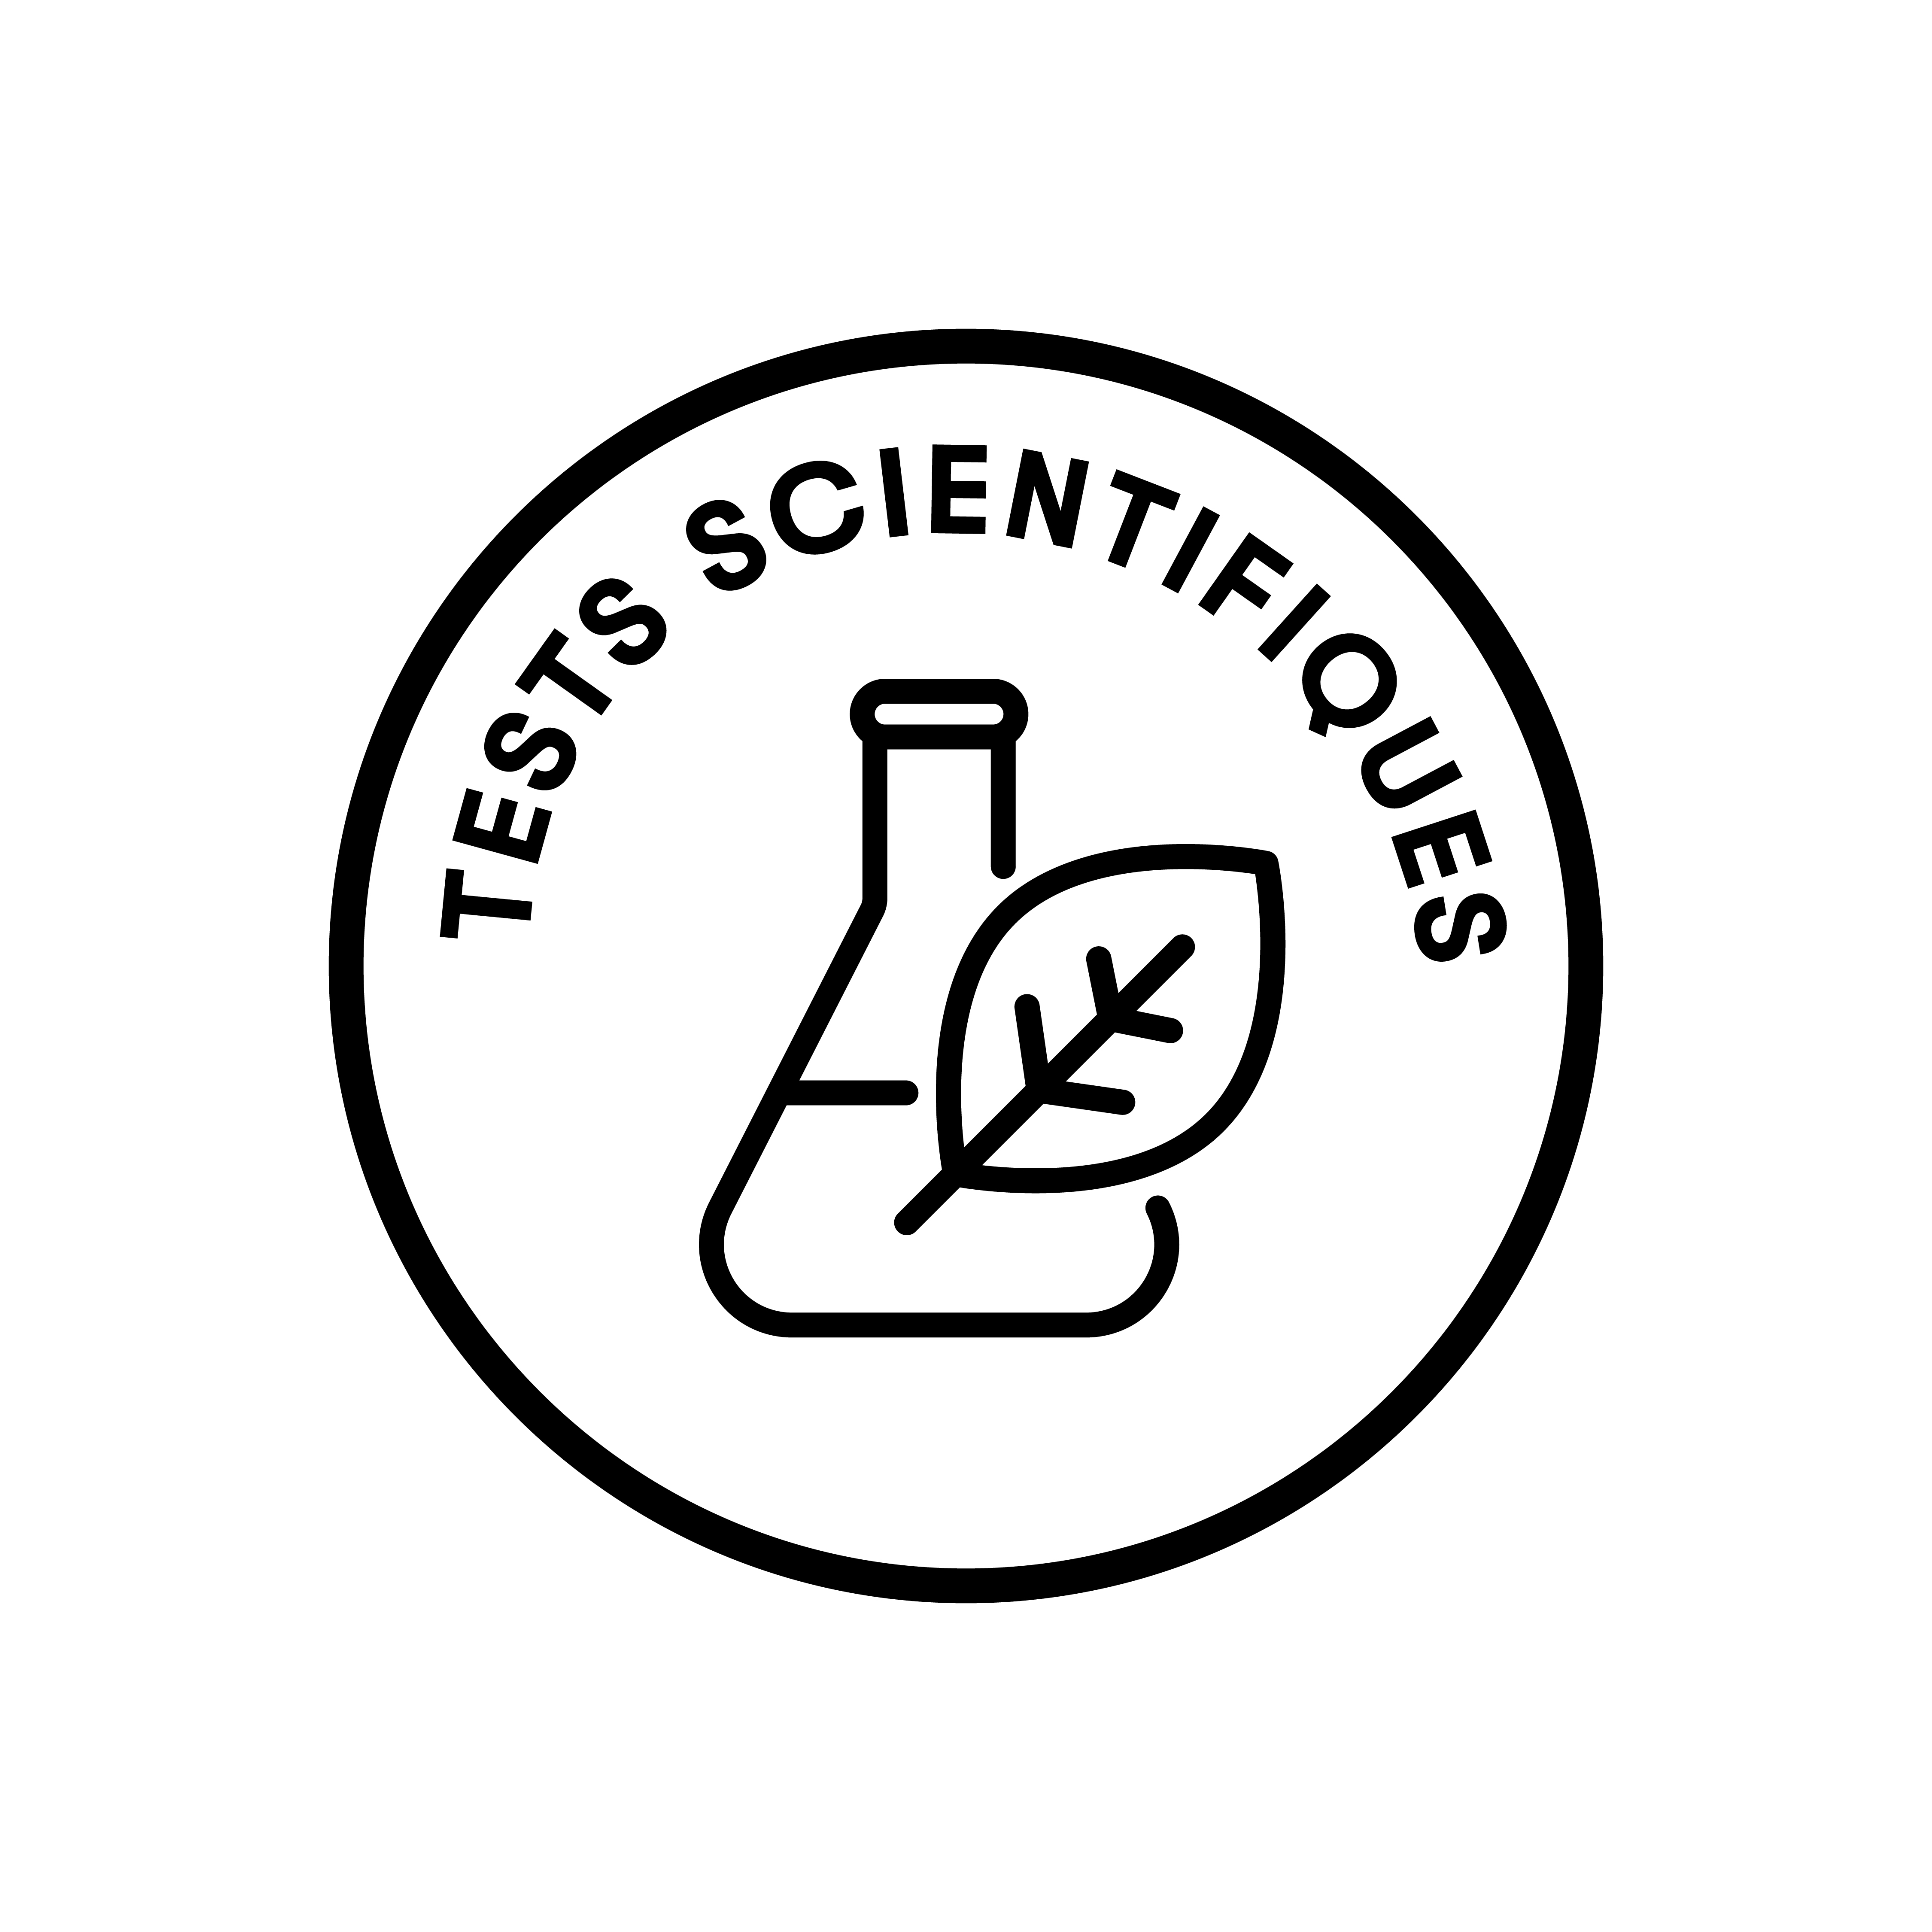 Young Living Seed to Seal science logo.